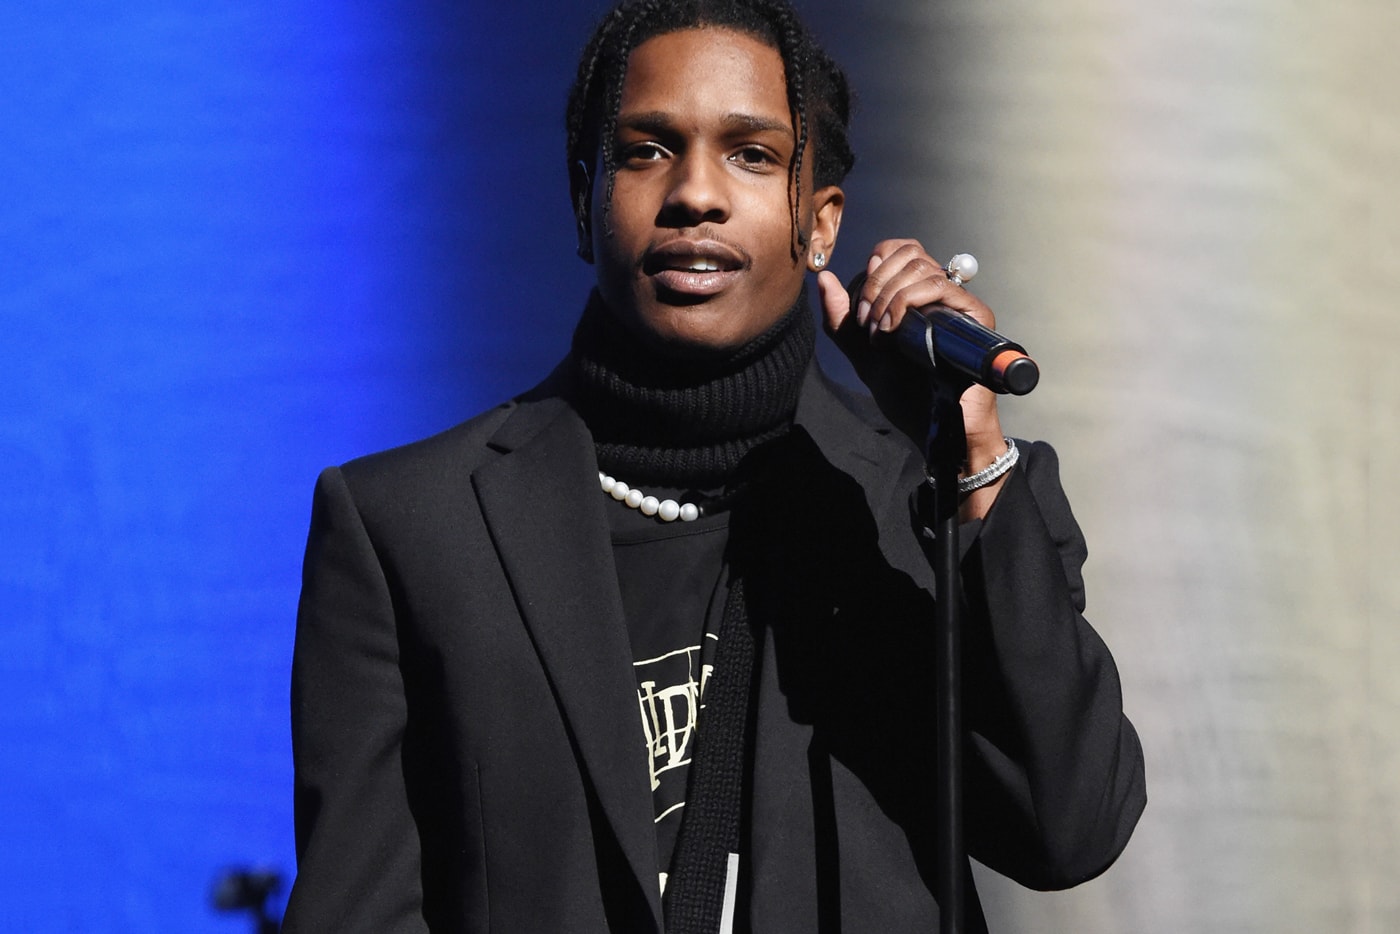 A$AP Rocky A$AP Forever Distorted Records The Tonight Show Starring Jimmy Fallon New Tracks Singles Testing Watch Stream Performance Broad City Abbi Jacobsen